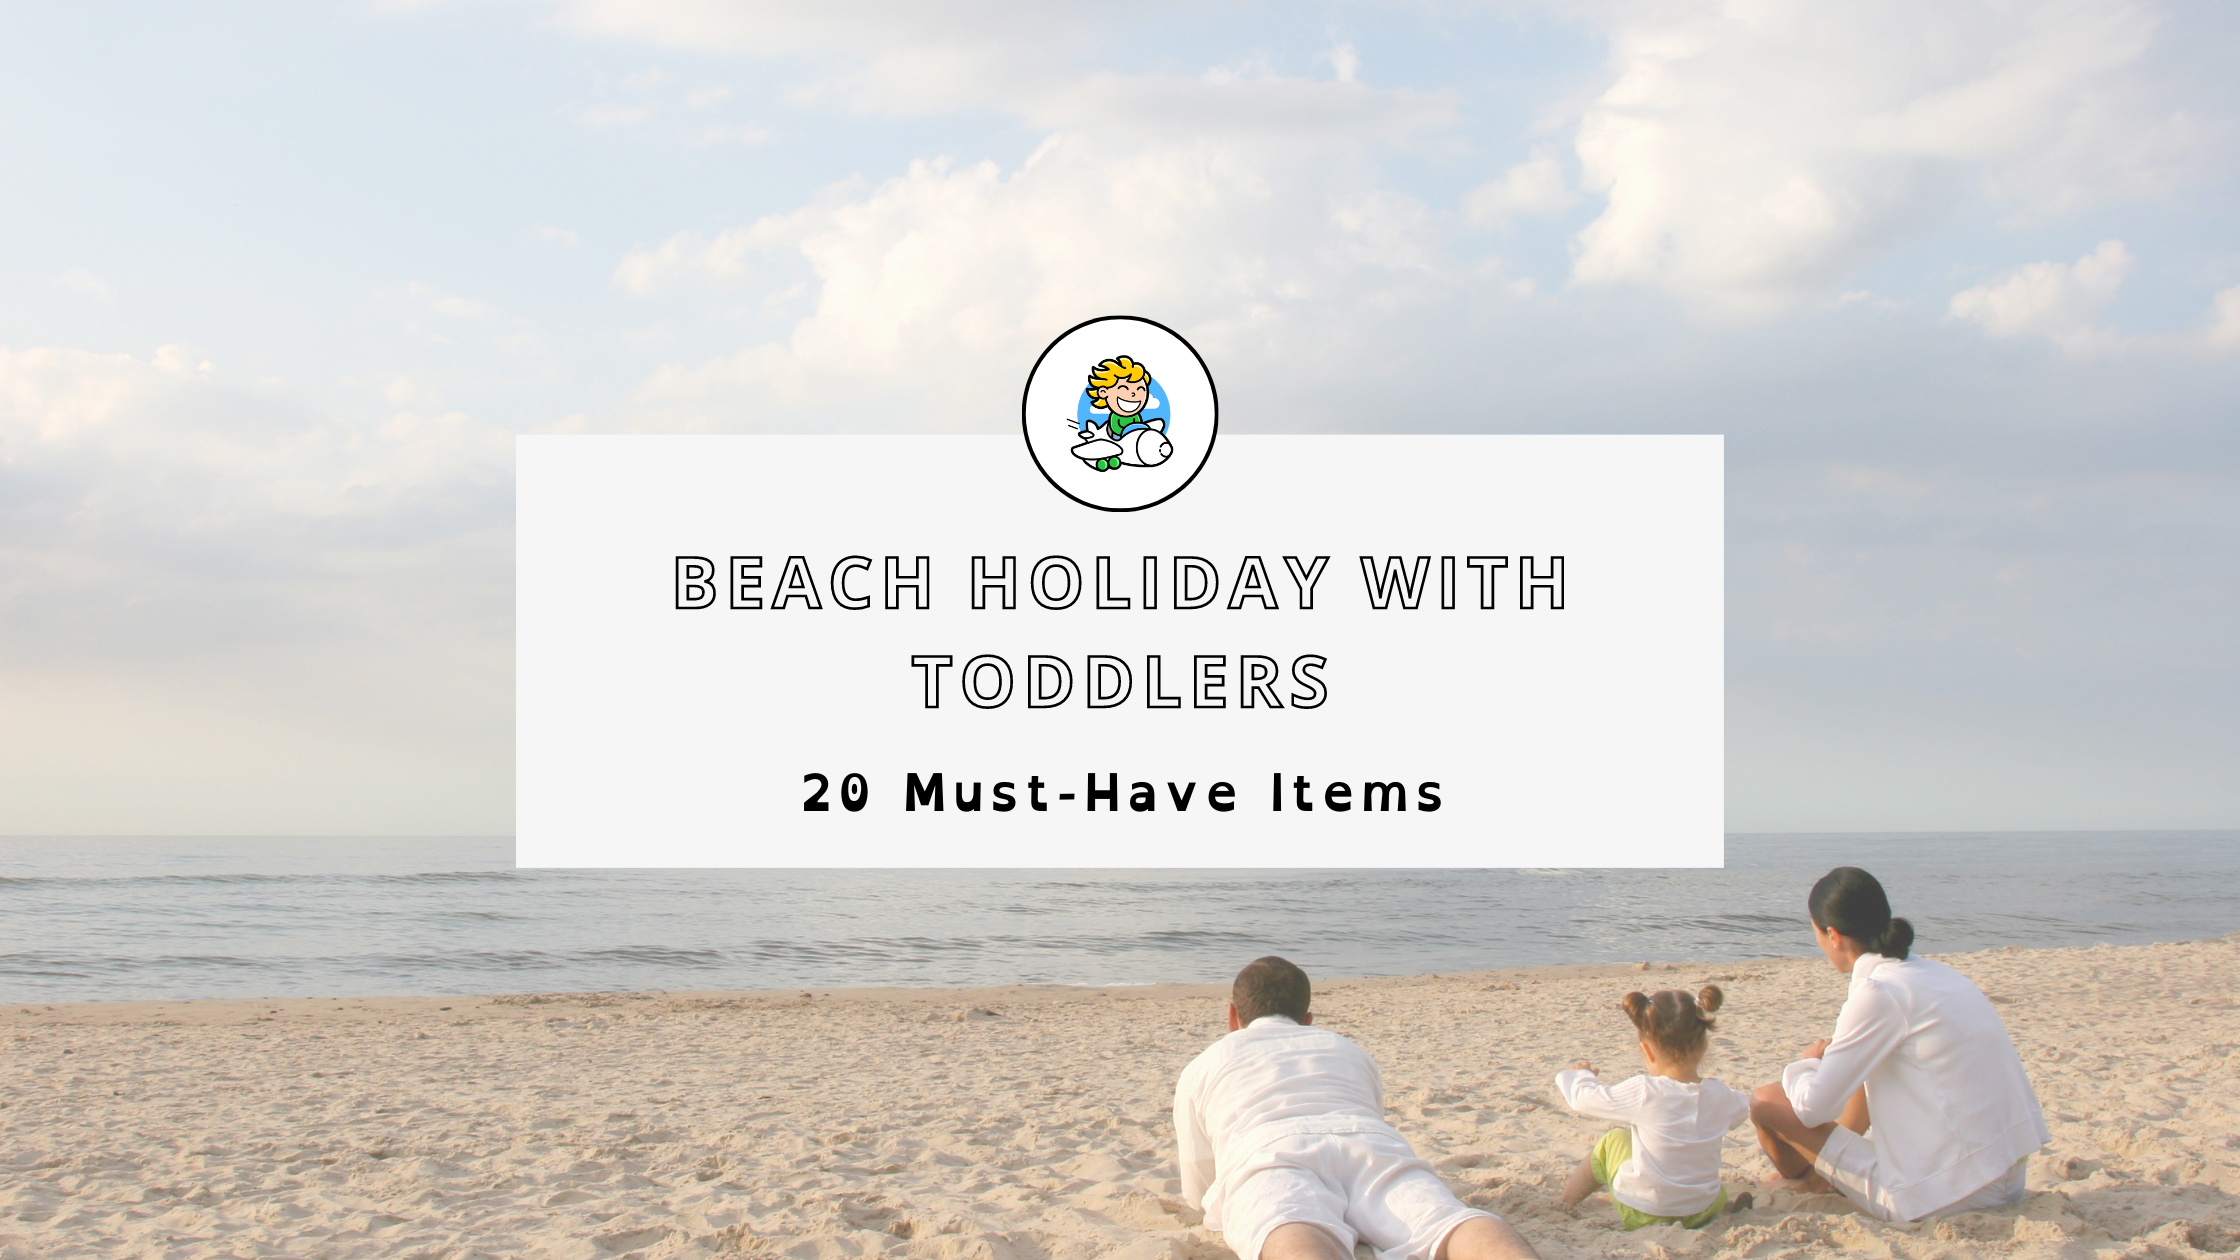 20 Must-Have Items on Your Packing List for a Beach Holiday with Toddlers